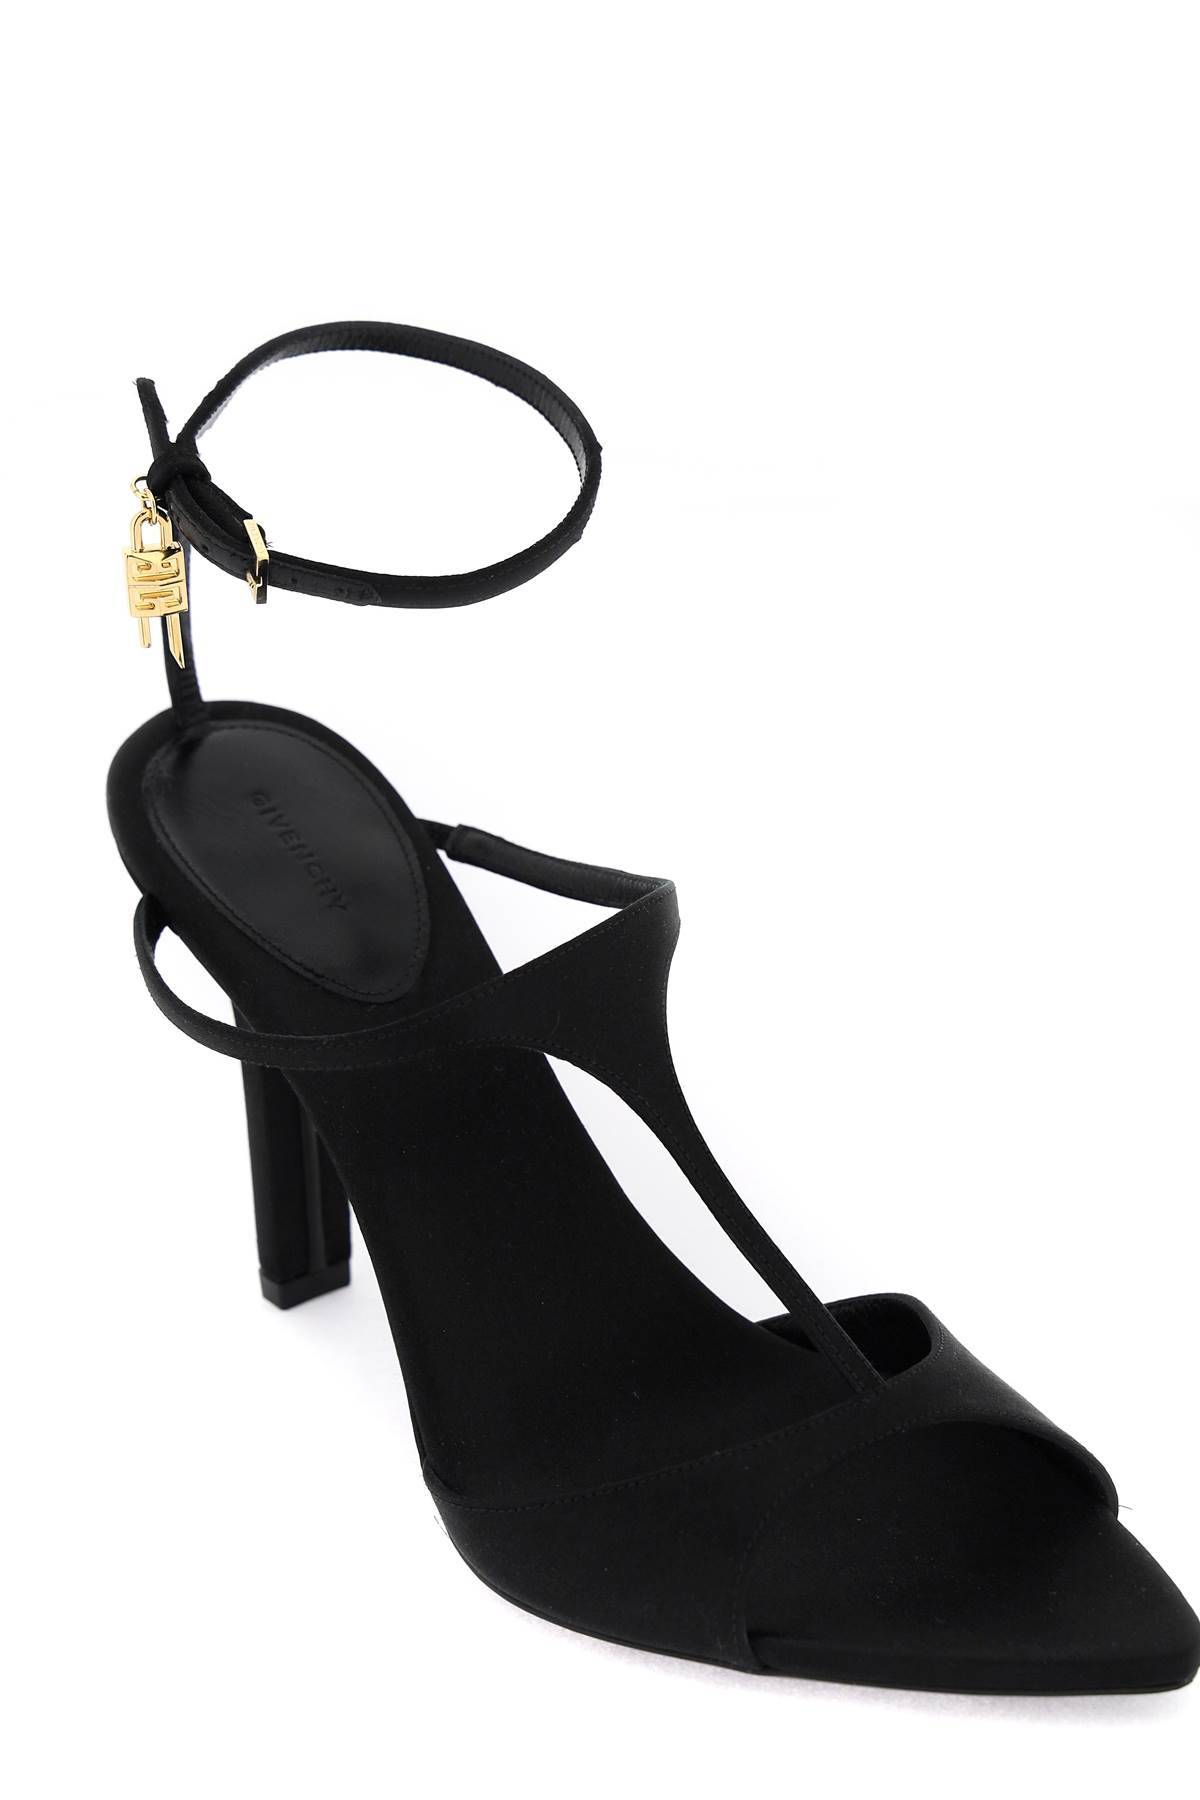 Shop Givenchy Satin Sandals With G Lock Charm In Black